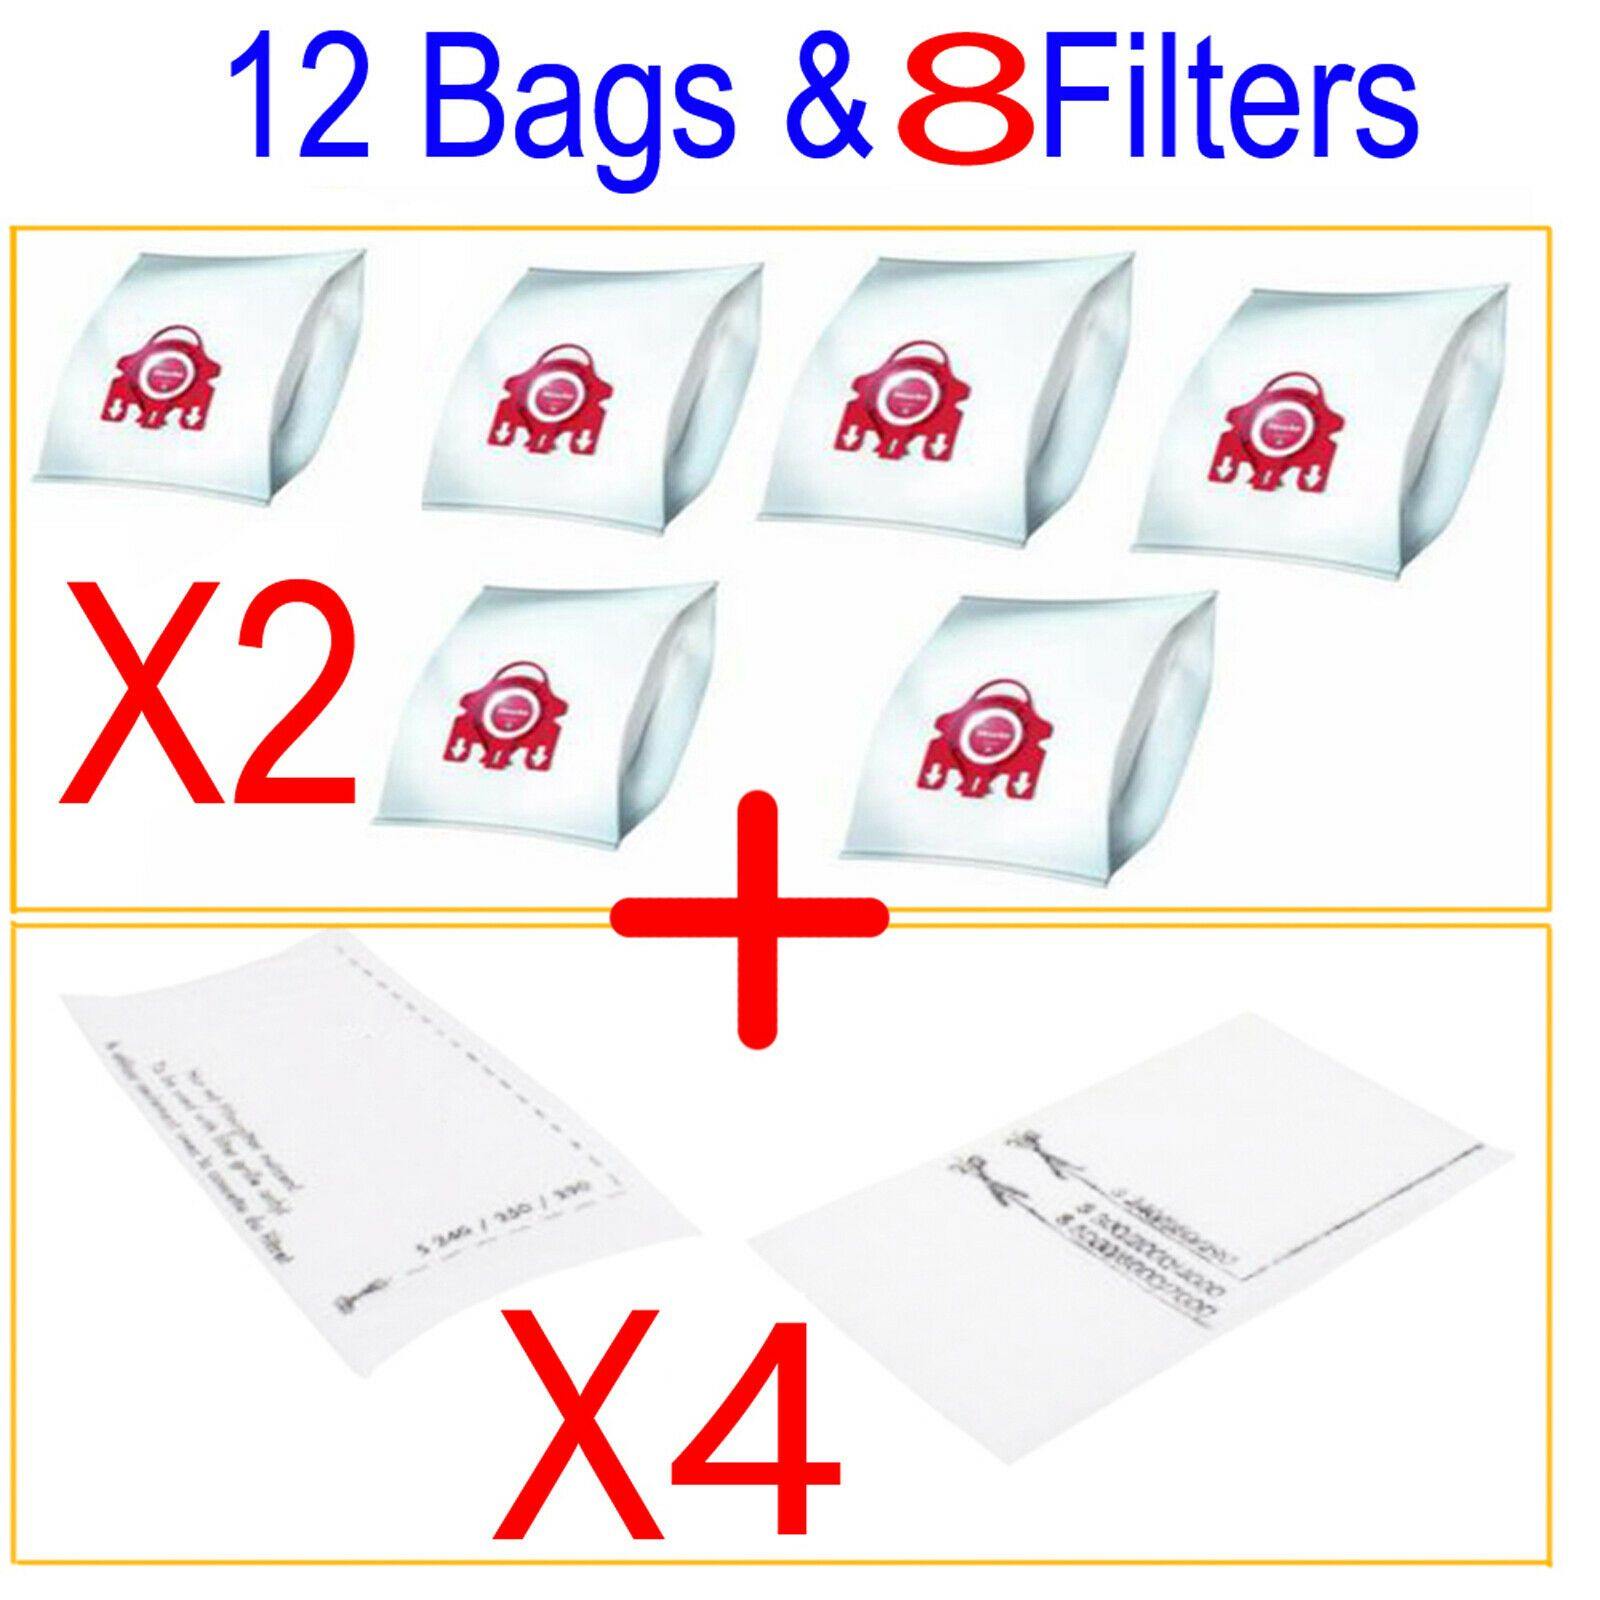 12 Dust Bags & 8 Filters For Miele FJM Vacuum Cleaner S300-S399 Hyclean 3D Type Sparesbarn